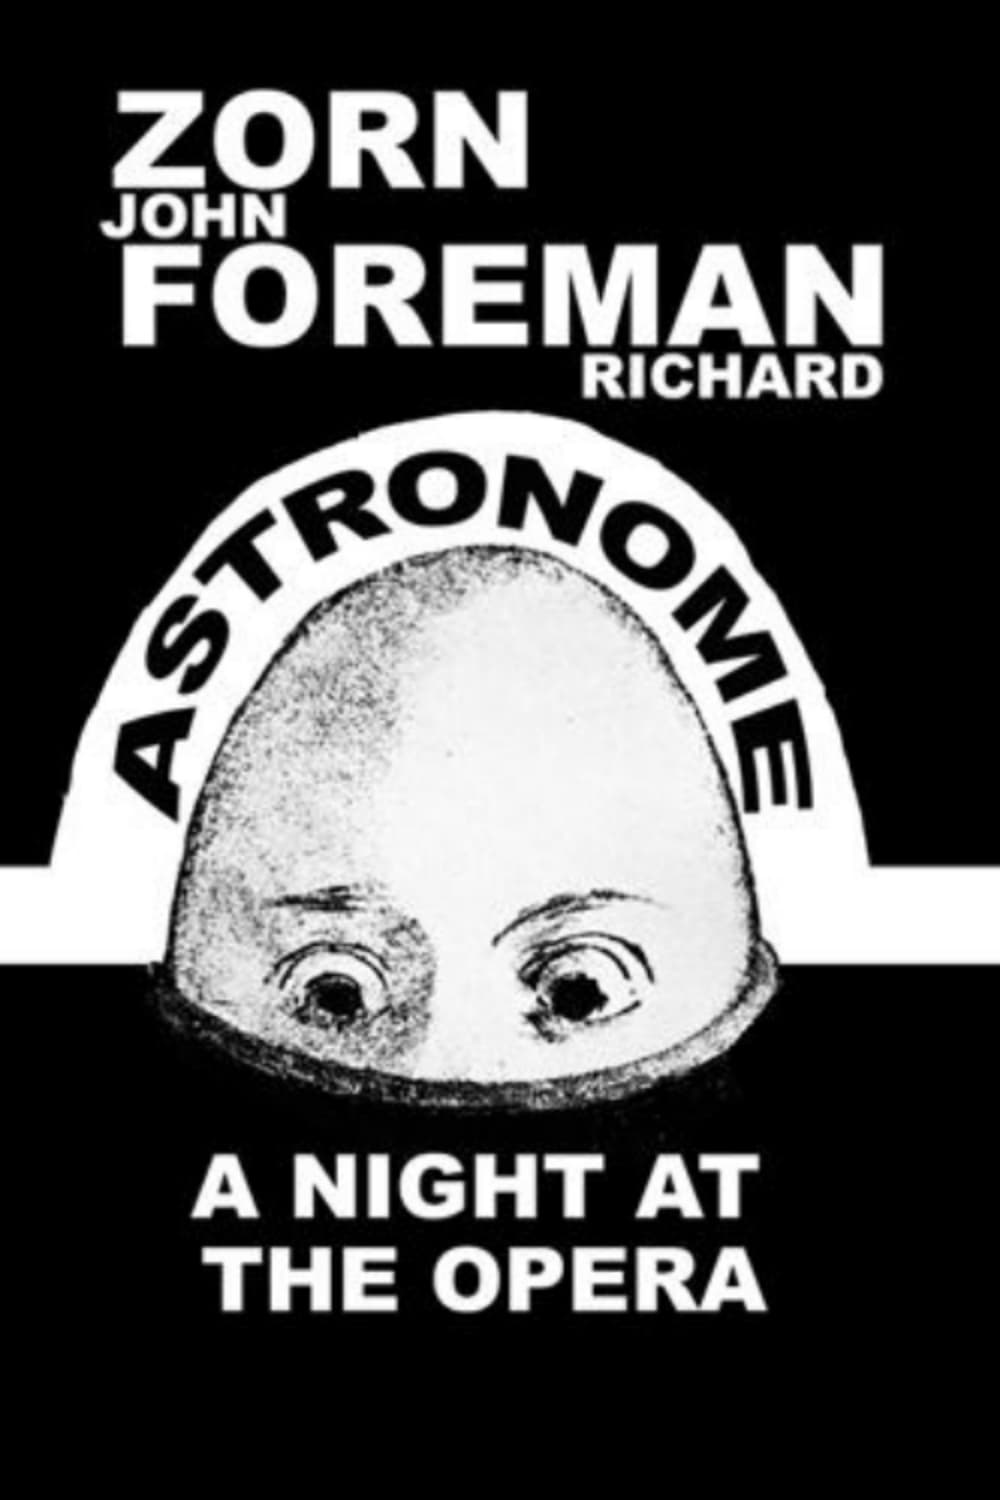 Astronome: A Night at the Opera (A Disturbing Initiation)